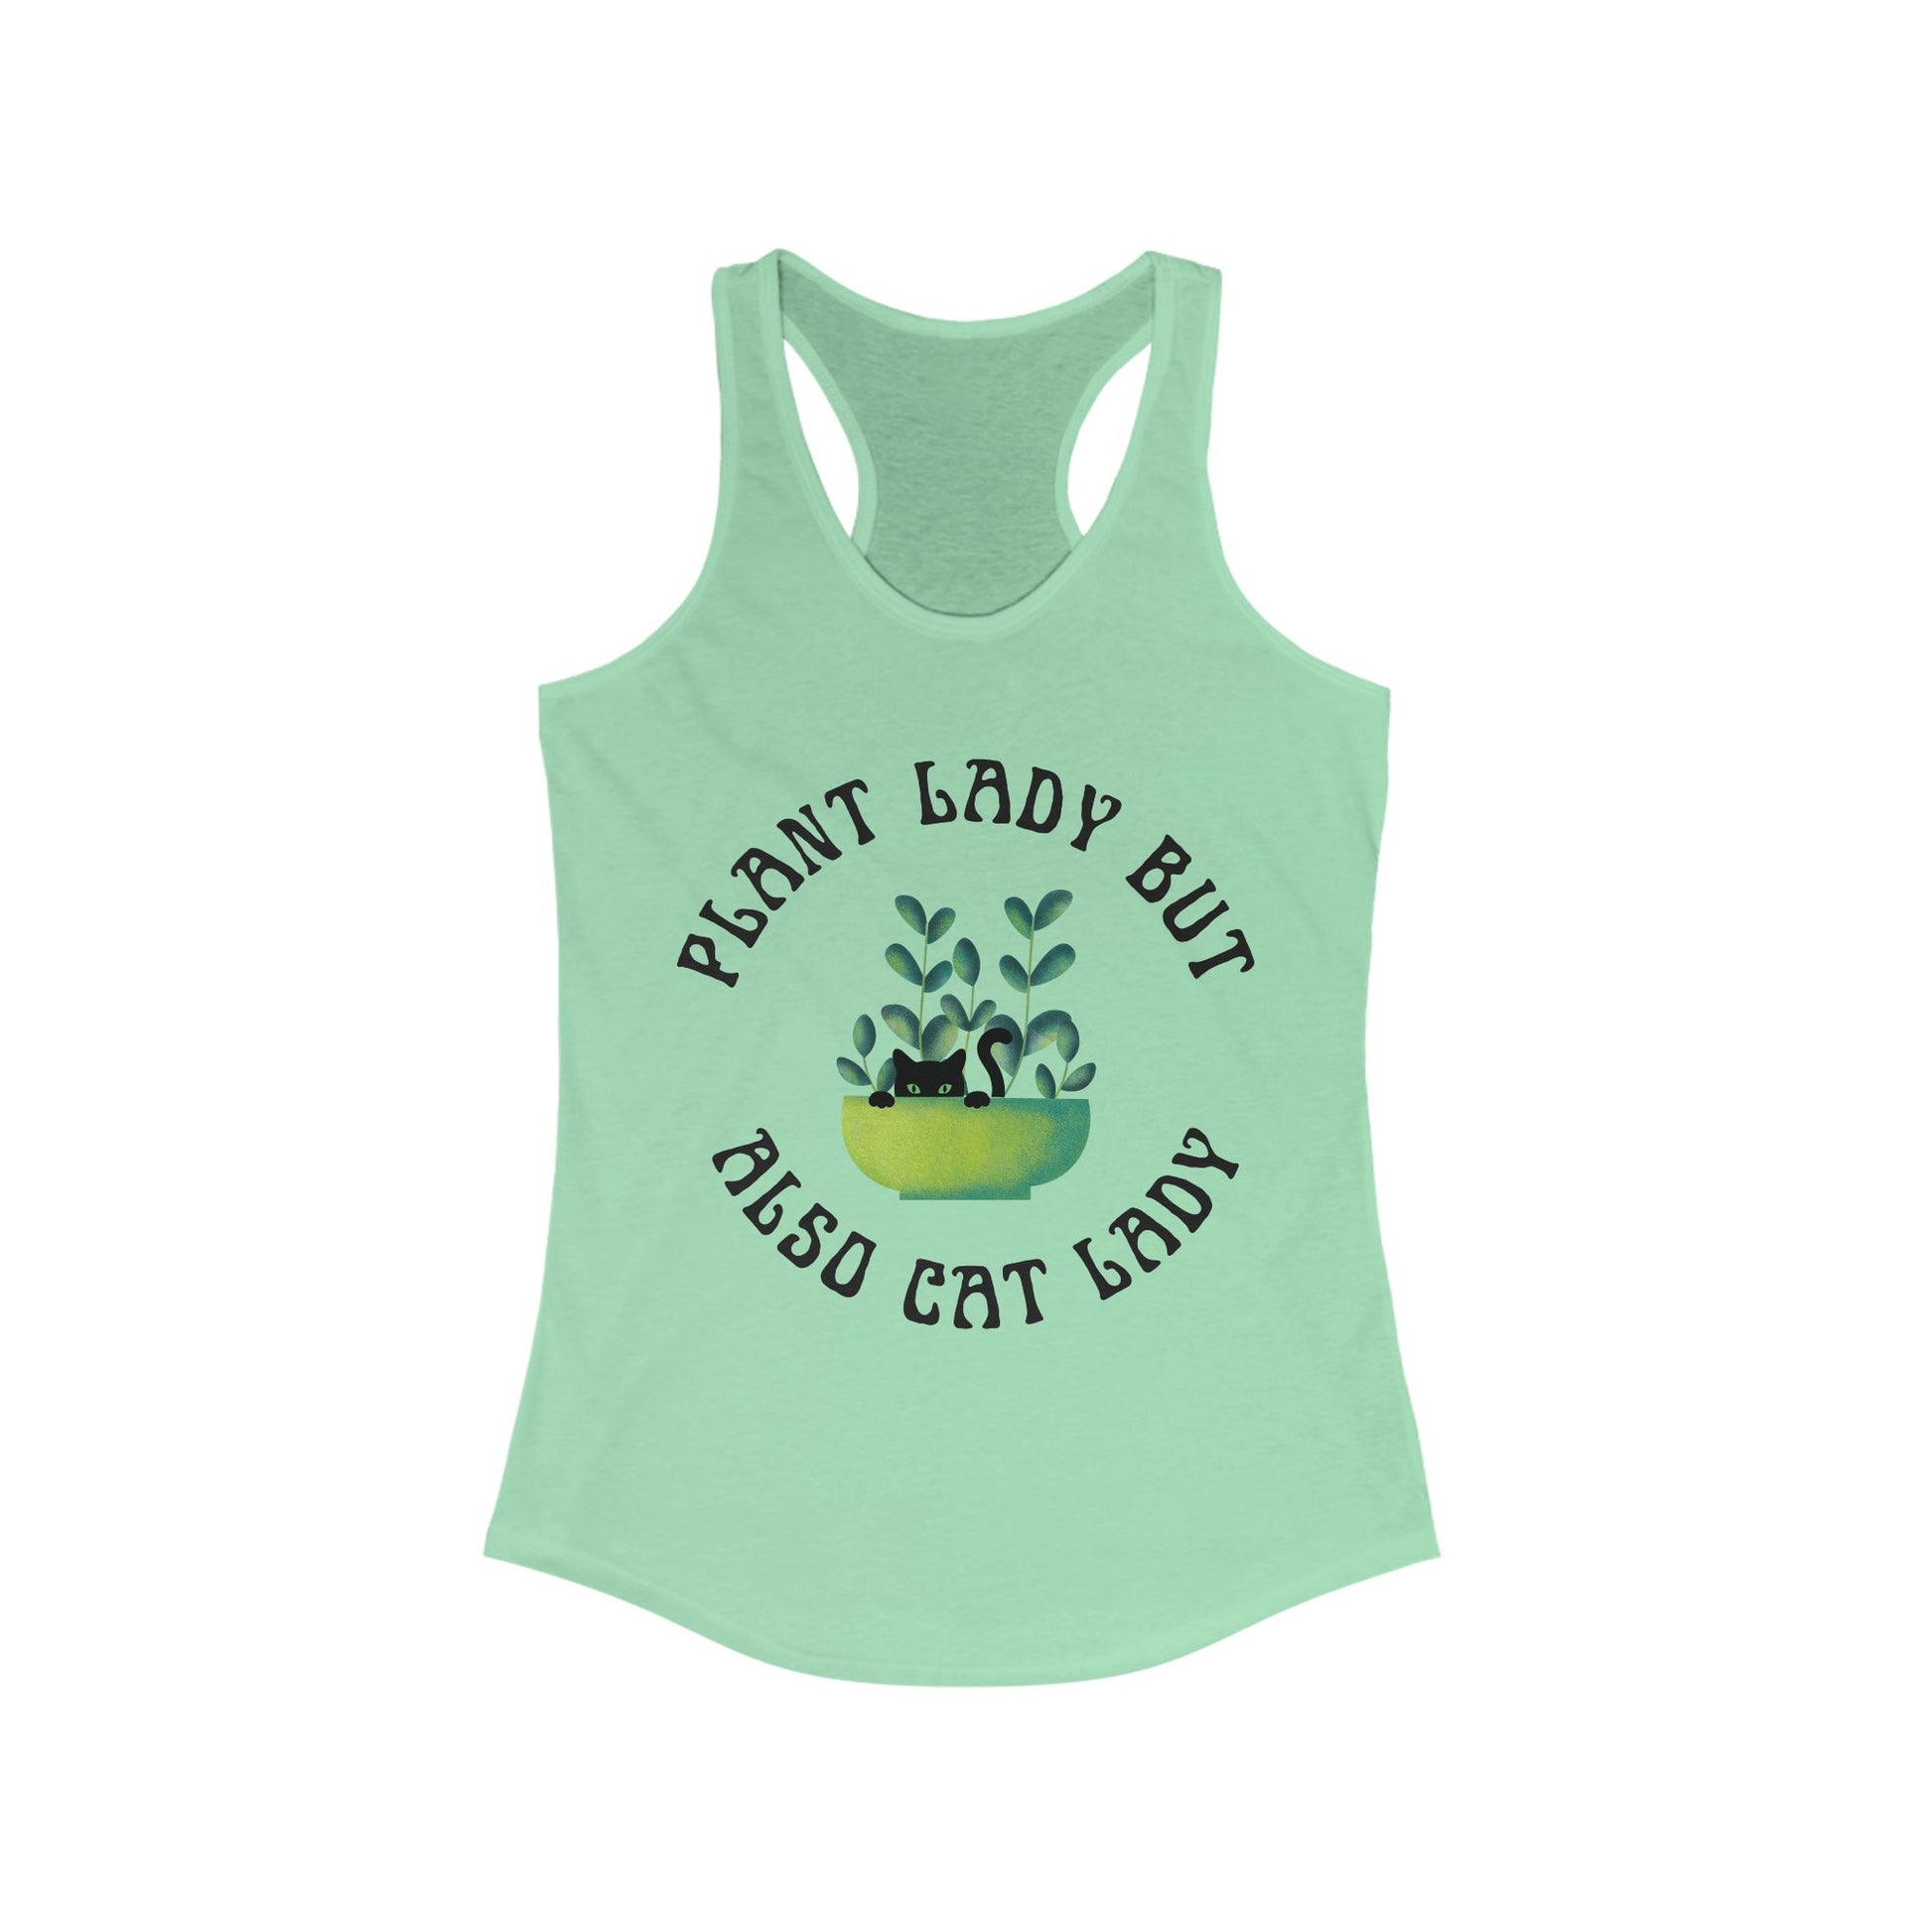 Plant Lady But Also Cat Lady Women's Ideal Racerback Tank